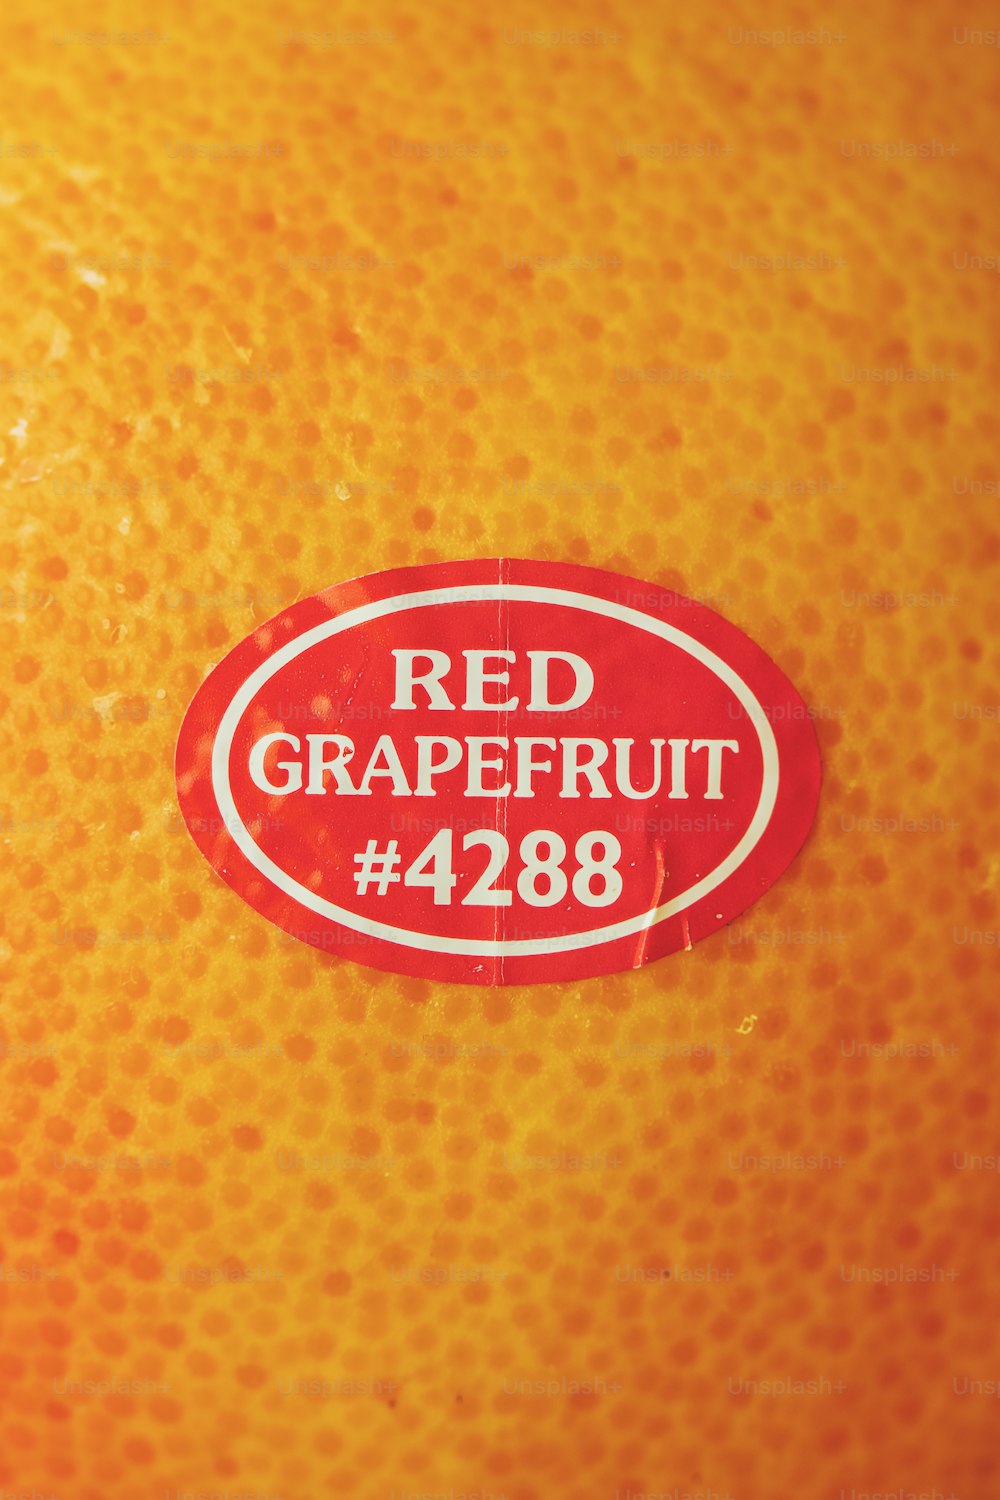 a close up of a red grapefruit label on an orange